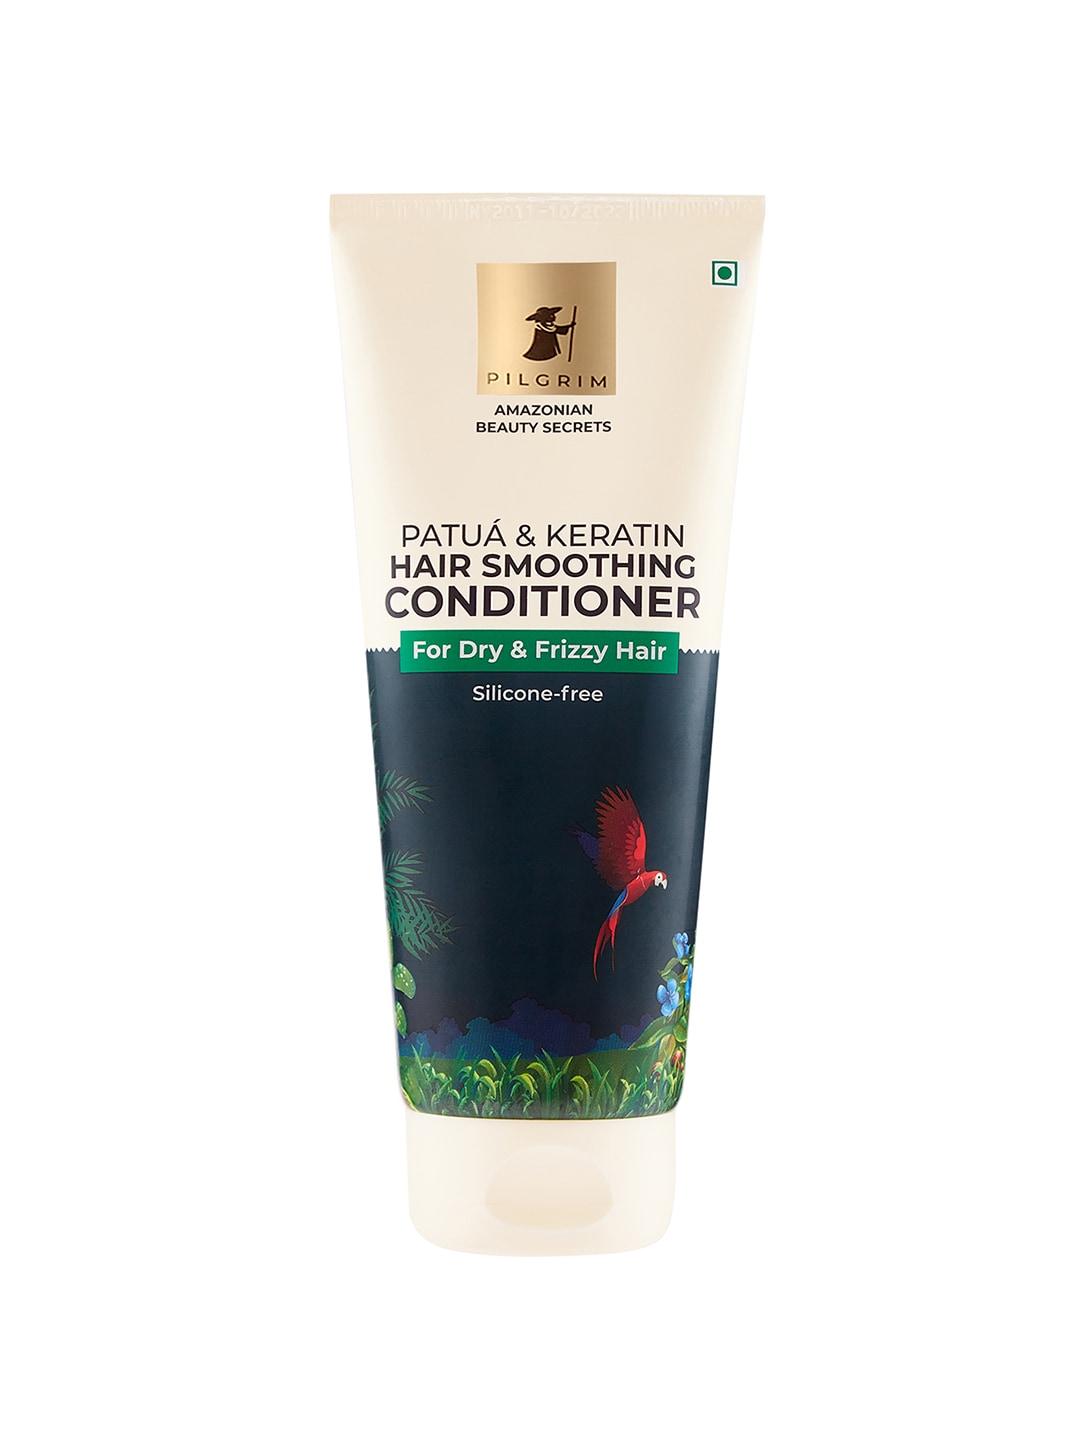 pilgrim patua & keratin hair smoothing conditioner for smooth, frizz-free & silky hair